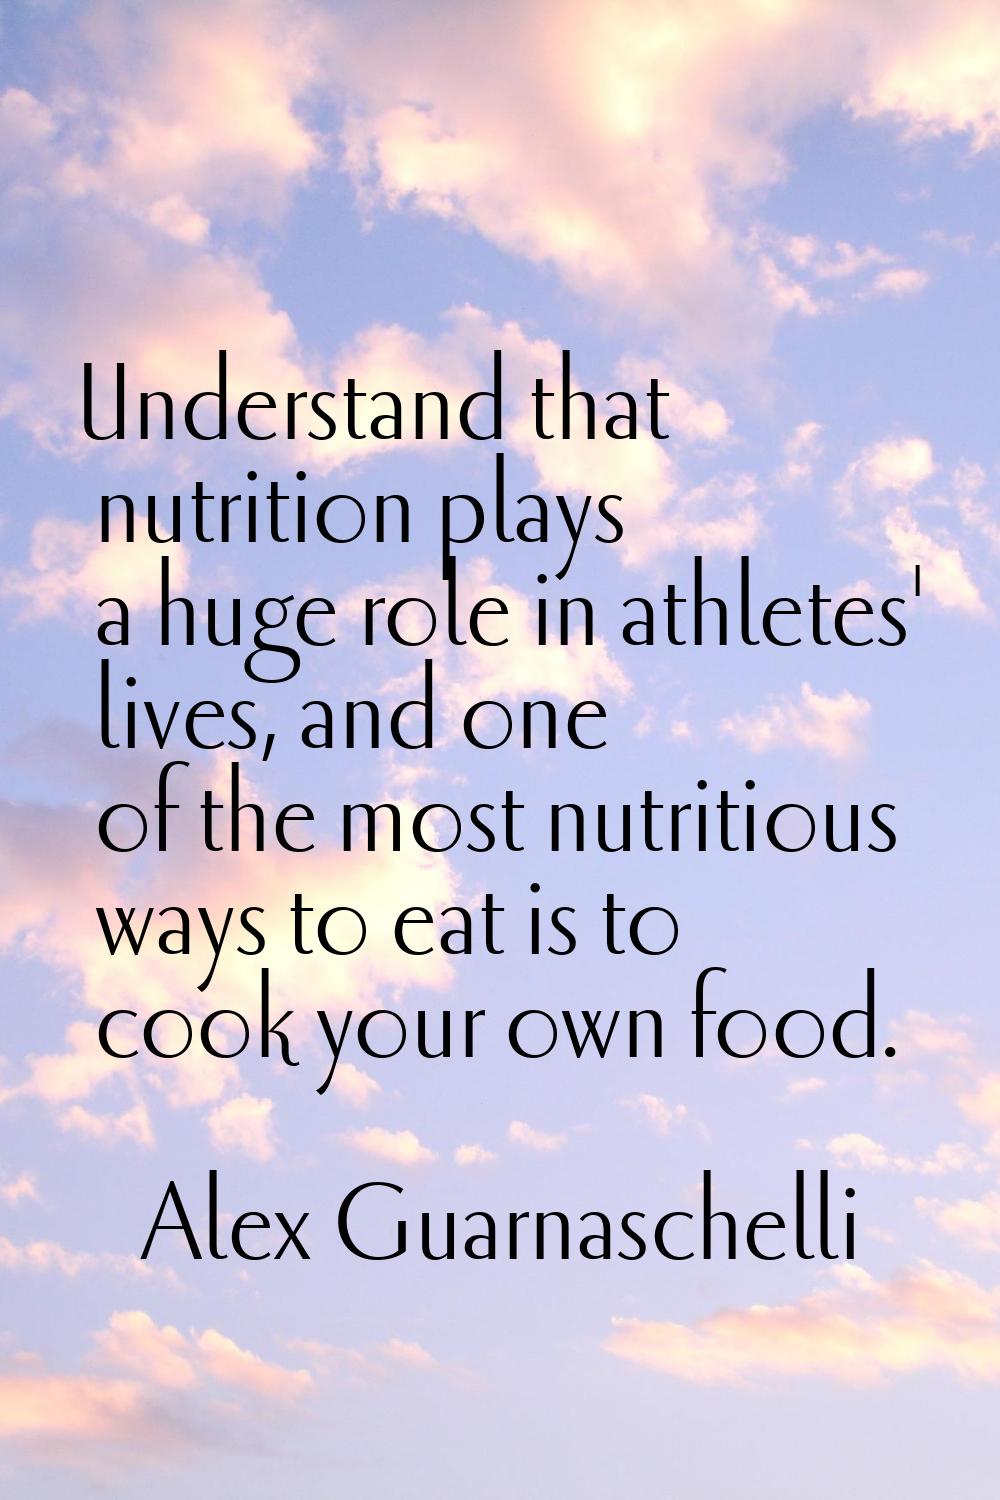 Understand that nutrition plays a huge role in athletes' lives, and one of the most nutritious ways